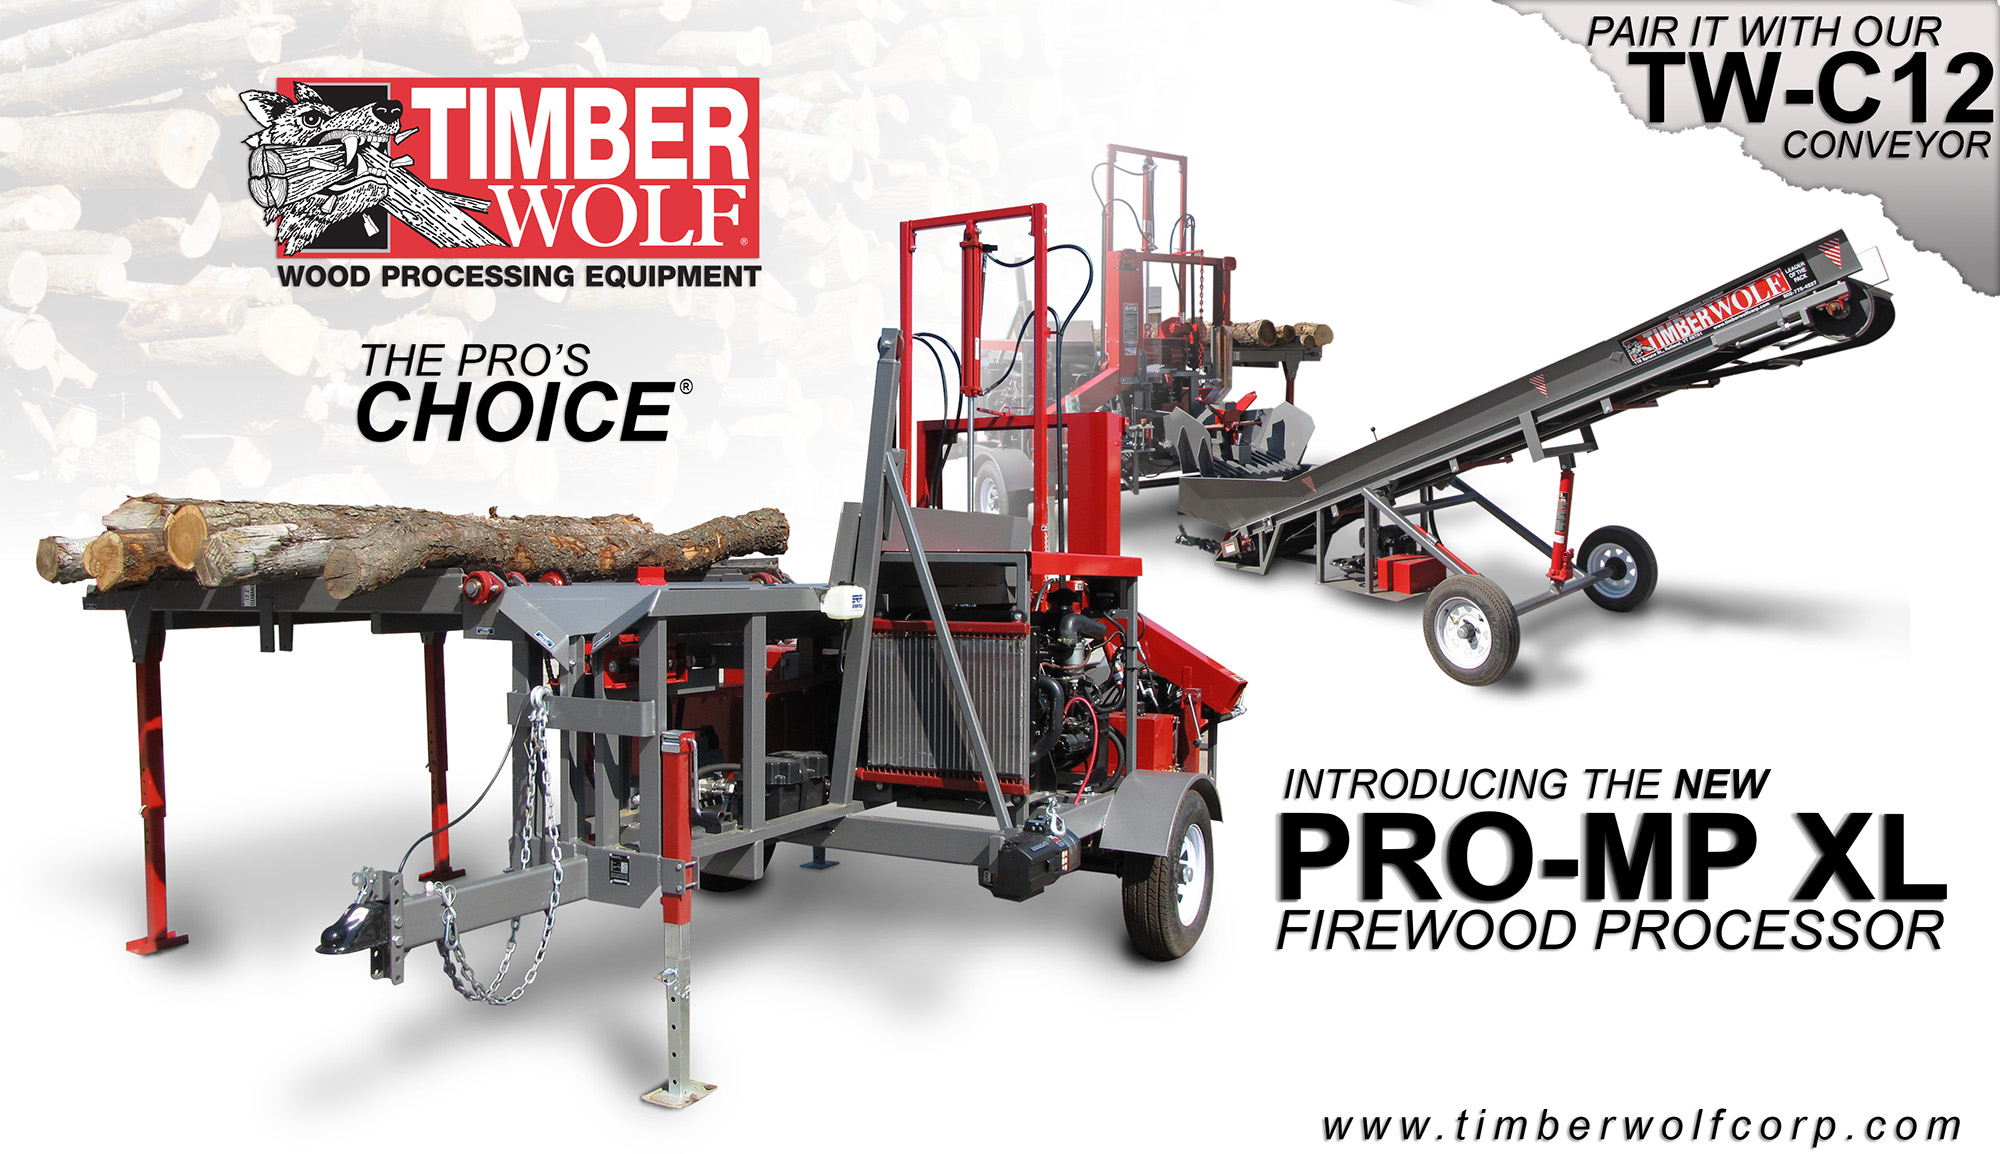 Image of TW PRO-MP XL Firewood Processor for promotional use.